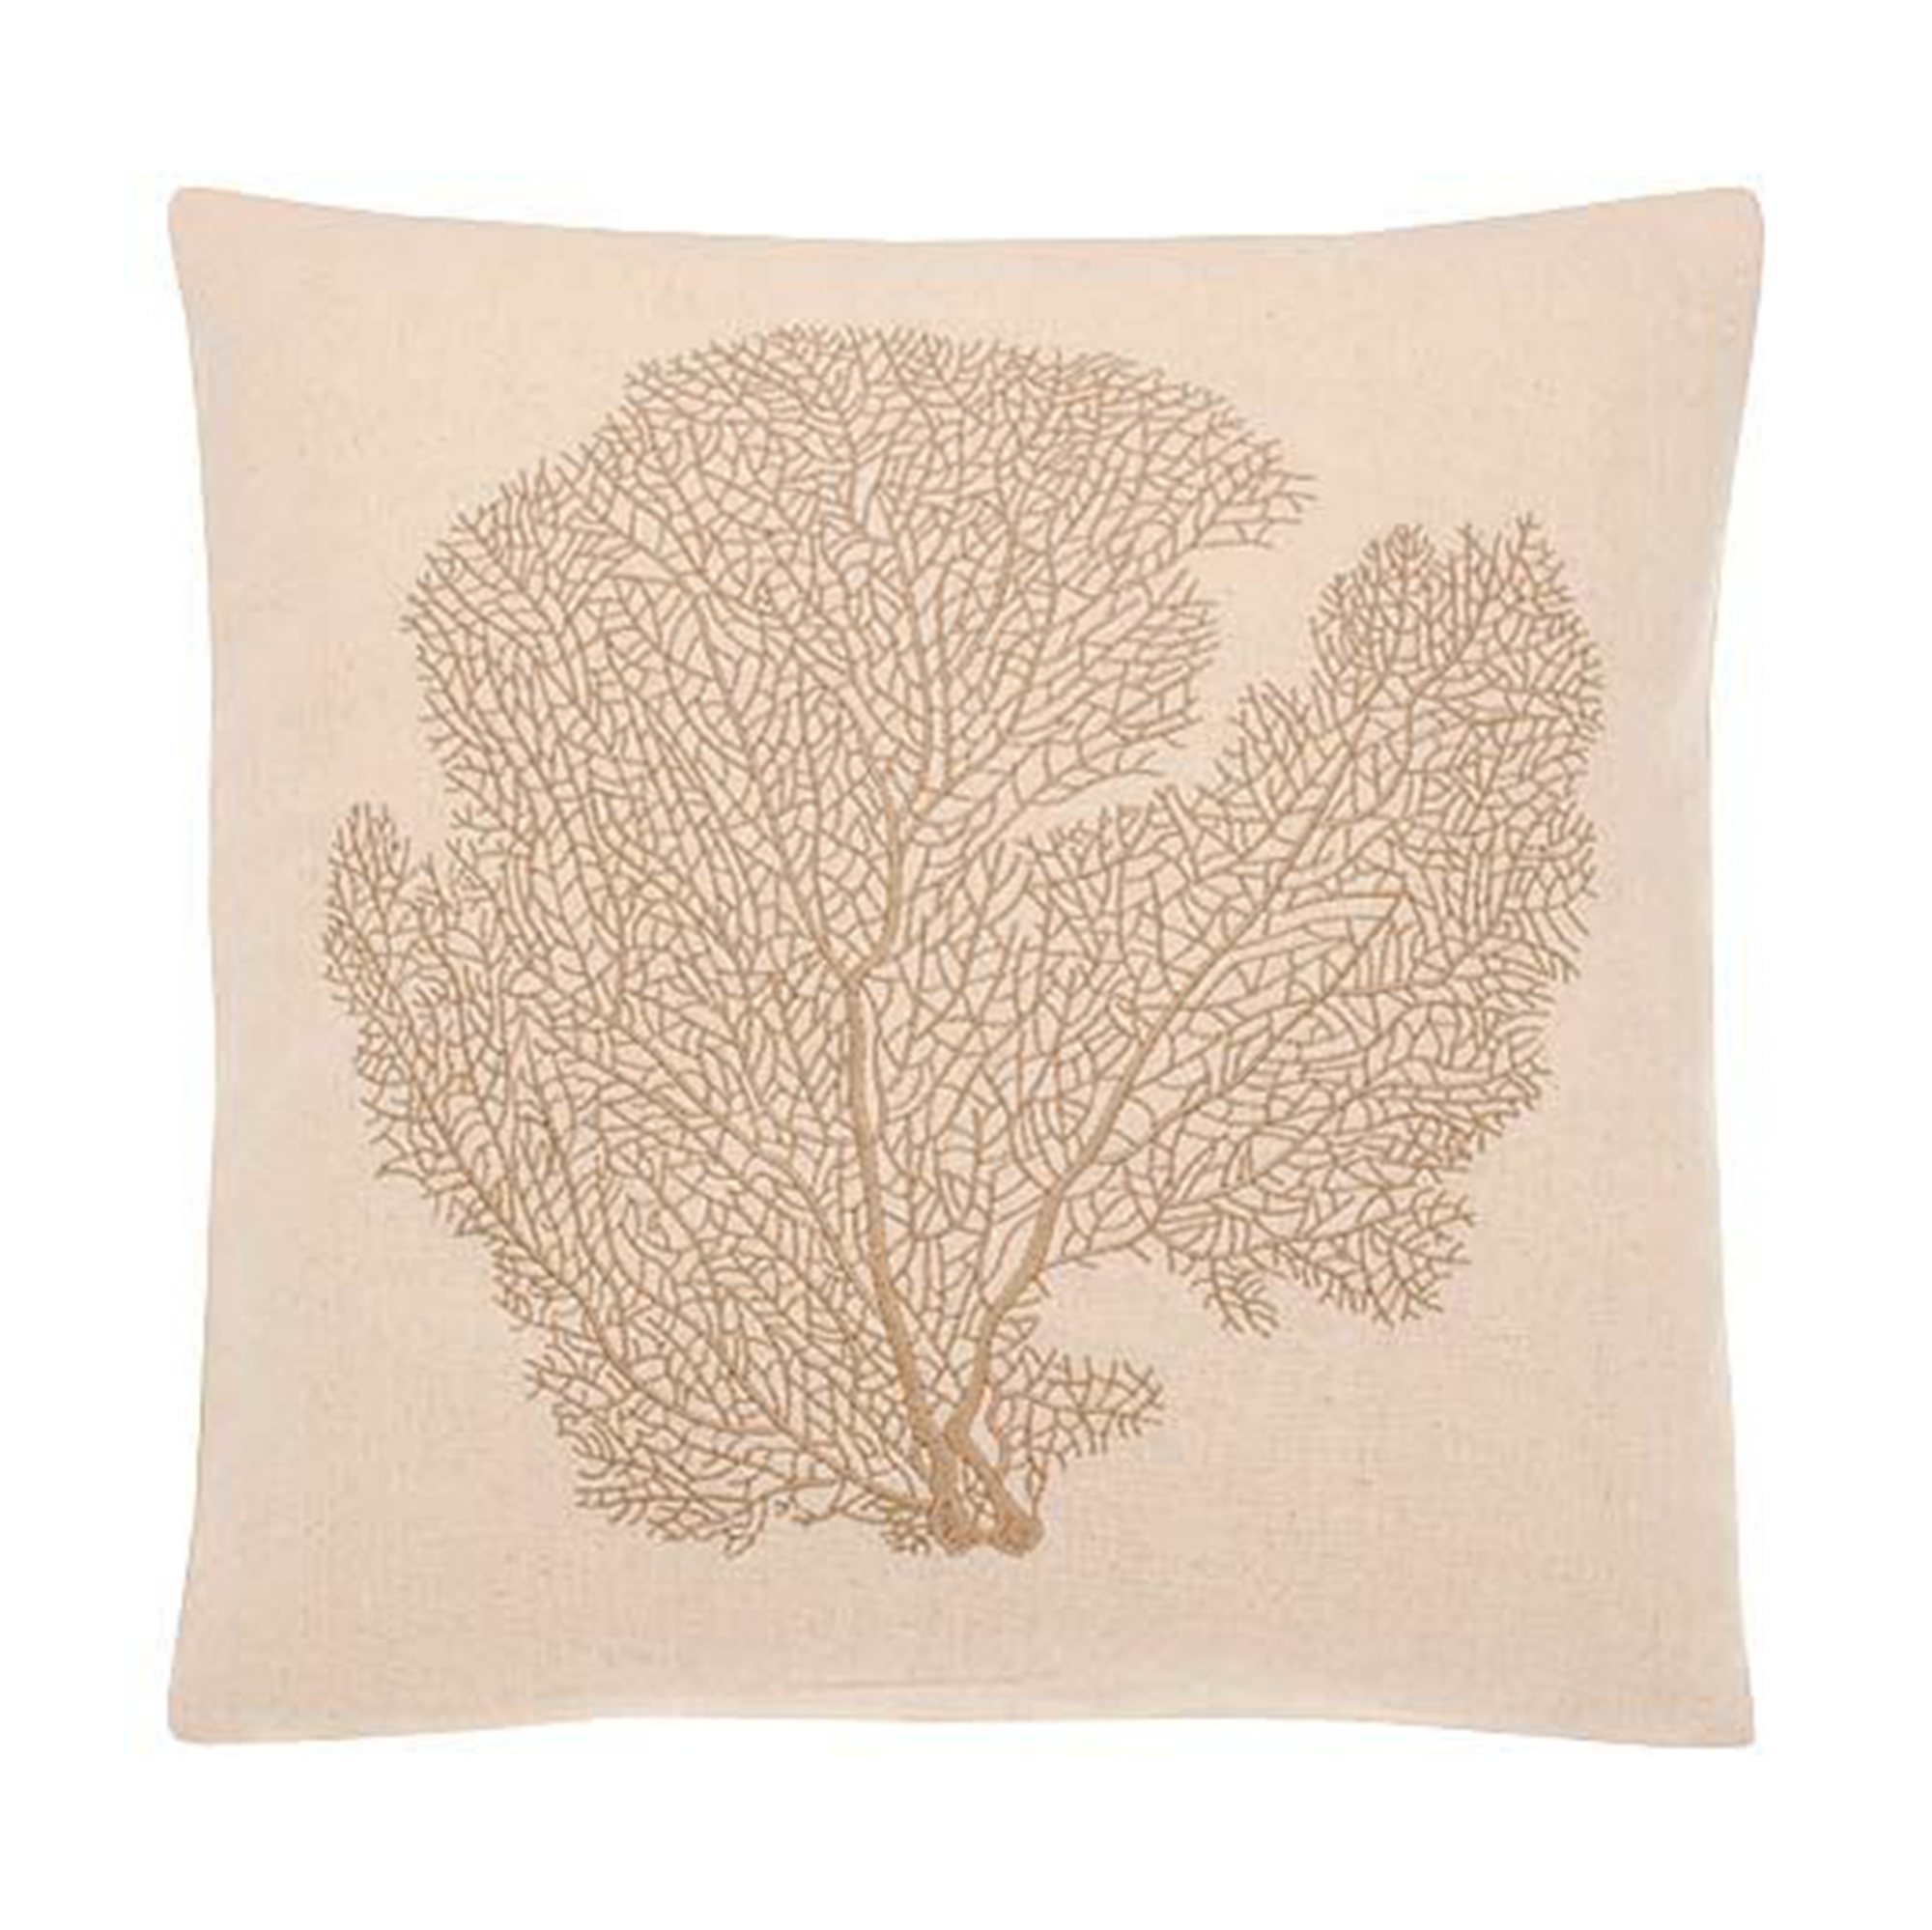 Red Coral Embroidered Pillow